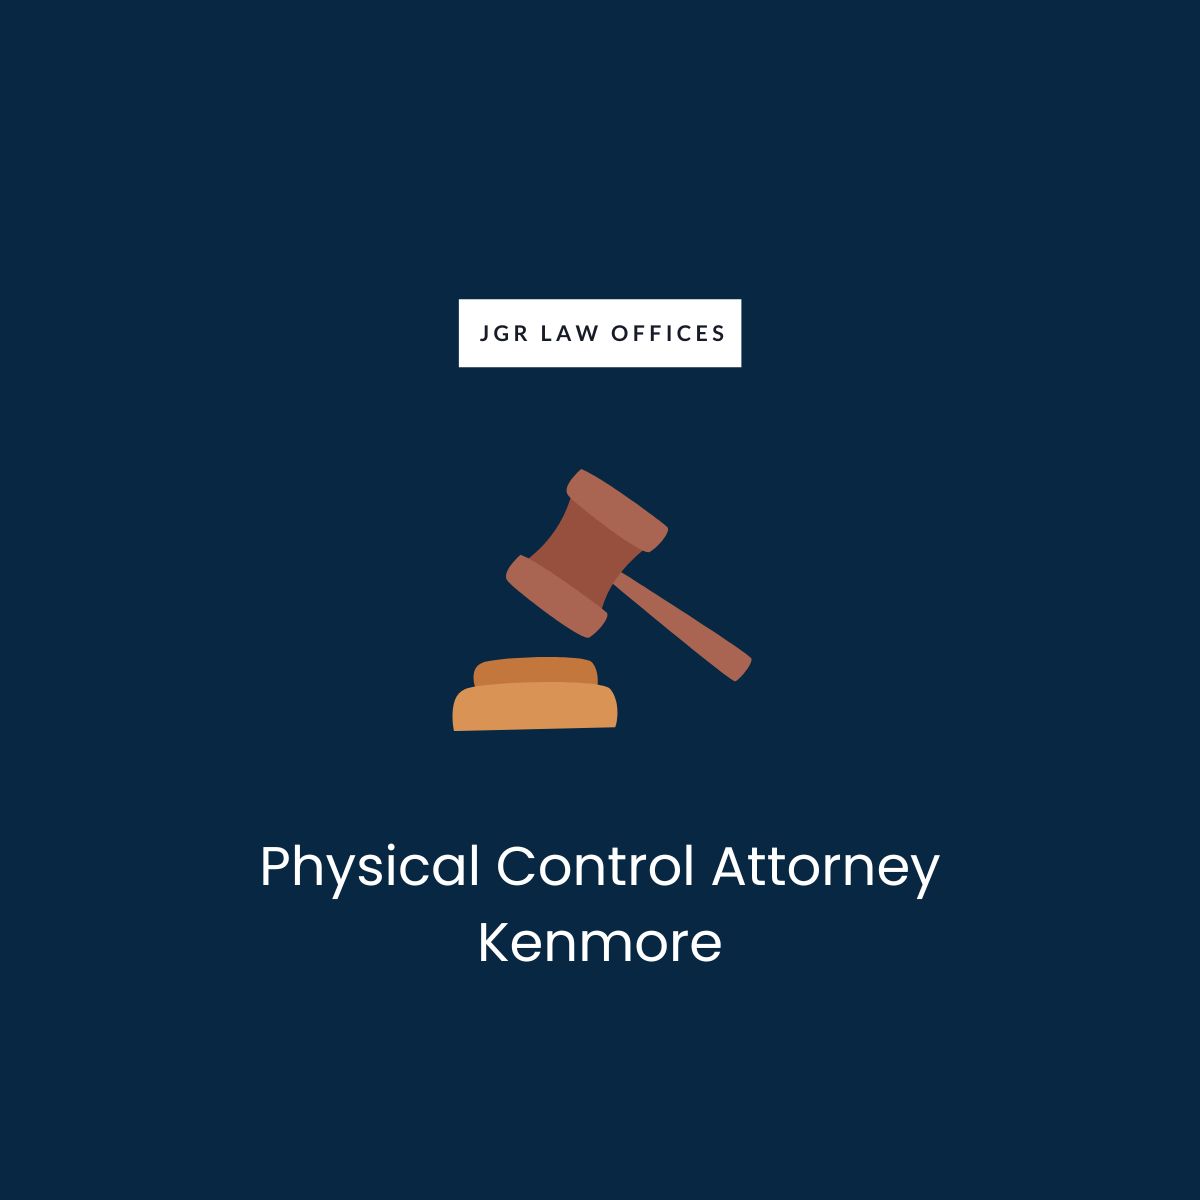 Physical Control Lawyer Kenmore Physical Control